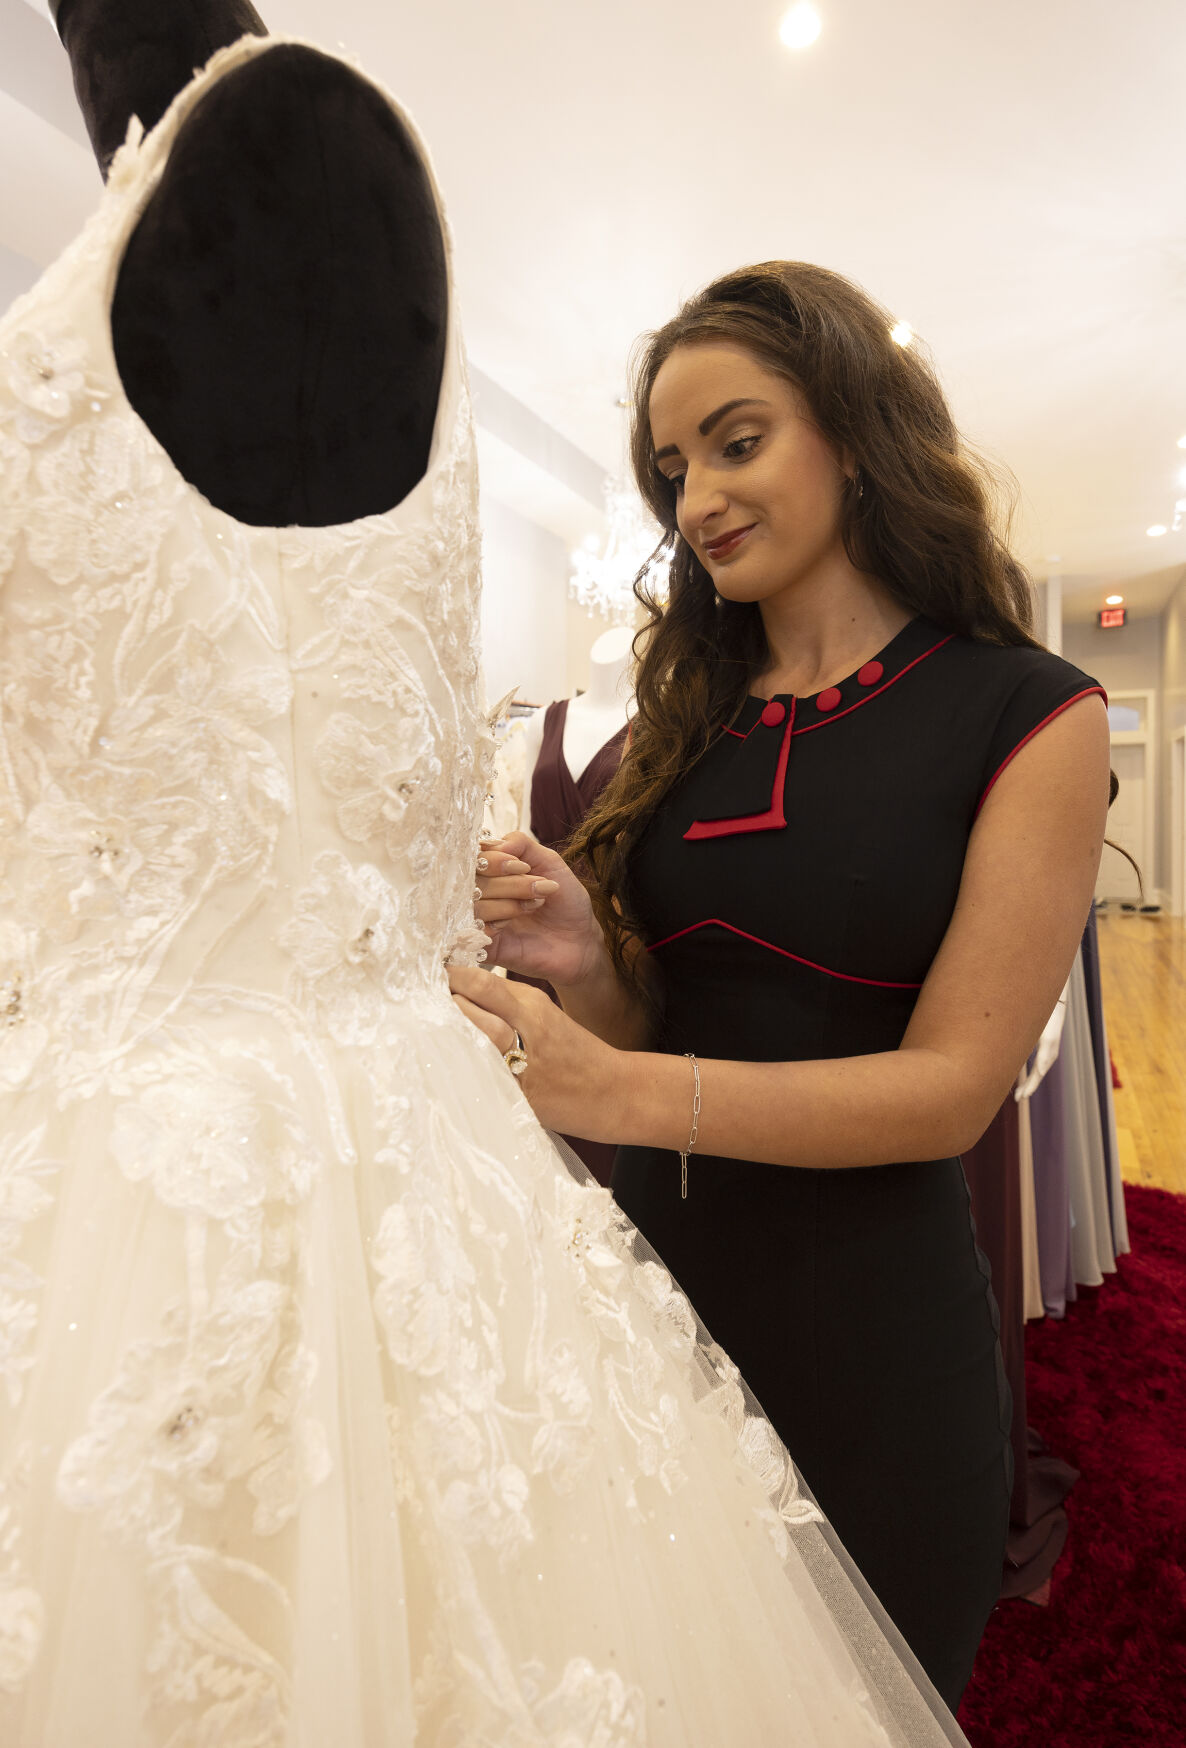 Soat zips up a wedding dress on a mannequin at All in One Bridal.    PHOTO CREDIT: Stephen Gassman
Telegraph Herald